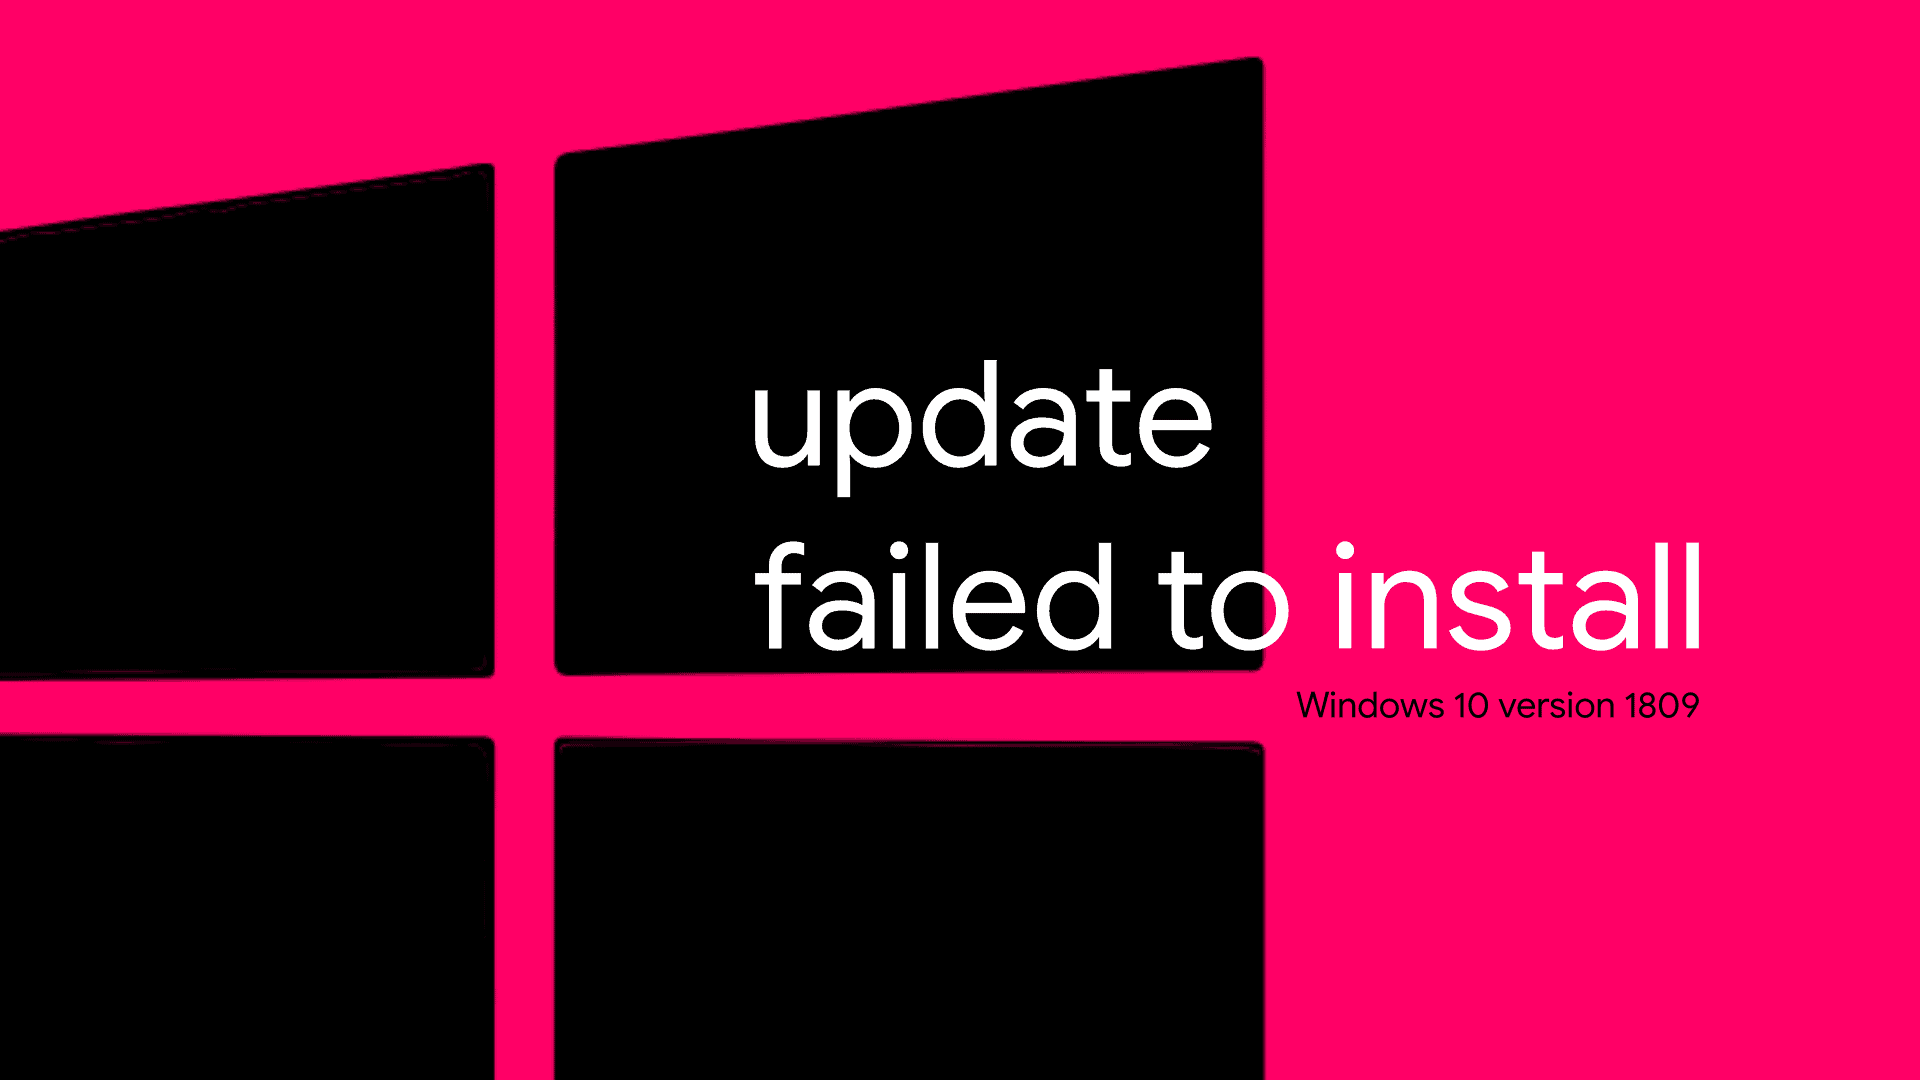 Windows 10 version 1809 KB4482887 update failed to install? Here's a fix